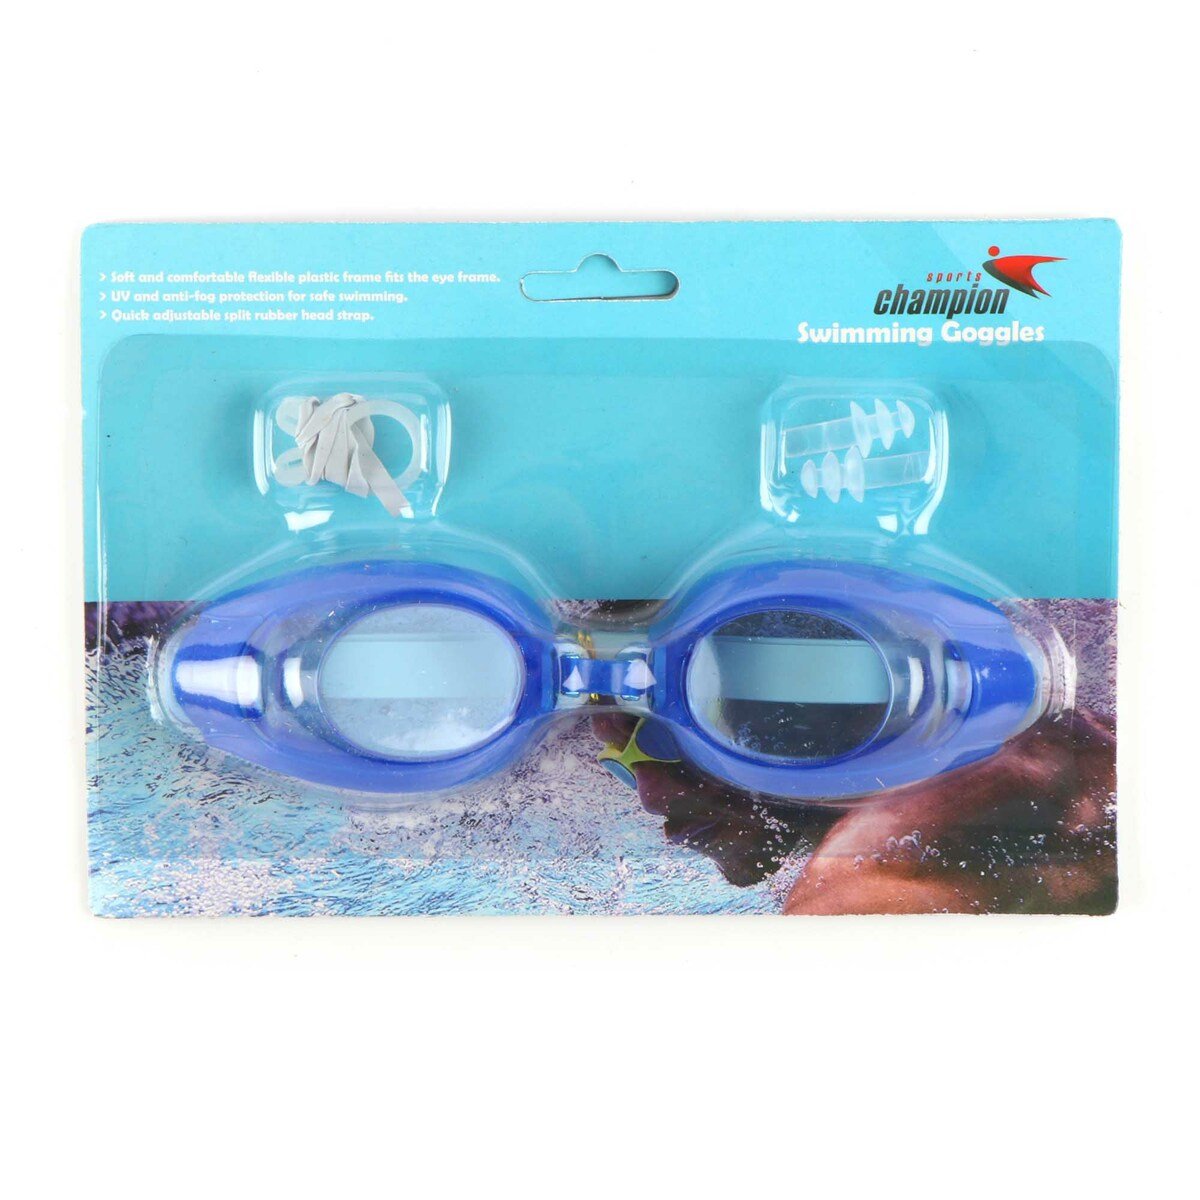 Sports Champion Swimming Goggles 43-6 Assorted